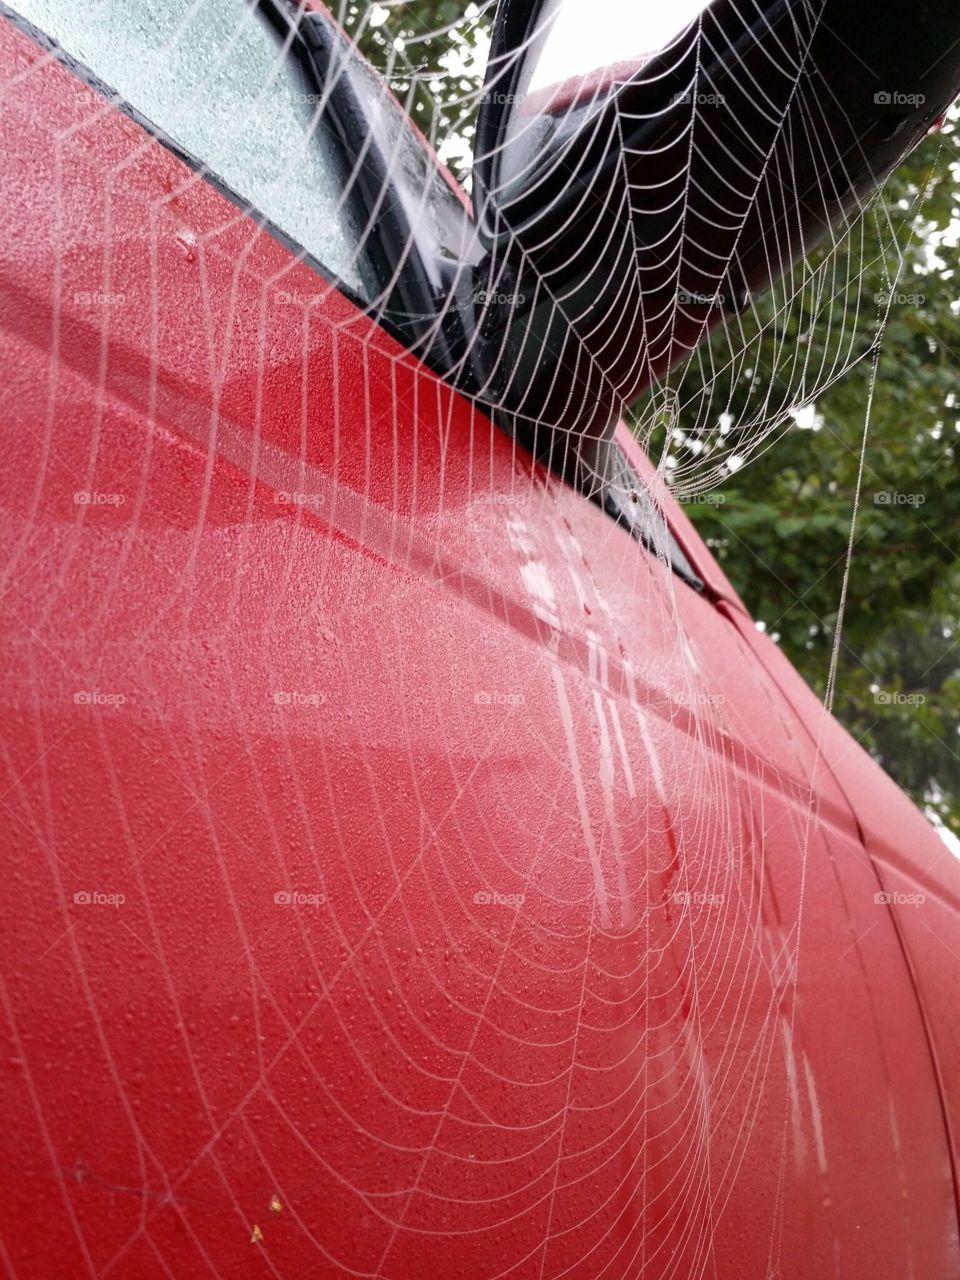 Spiderweb early in the morning